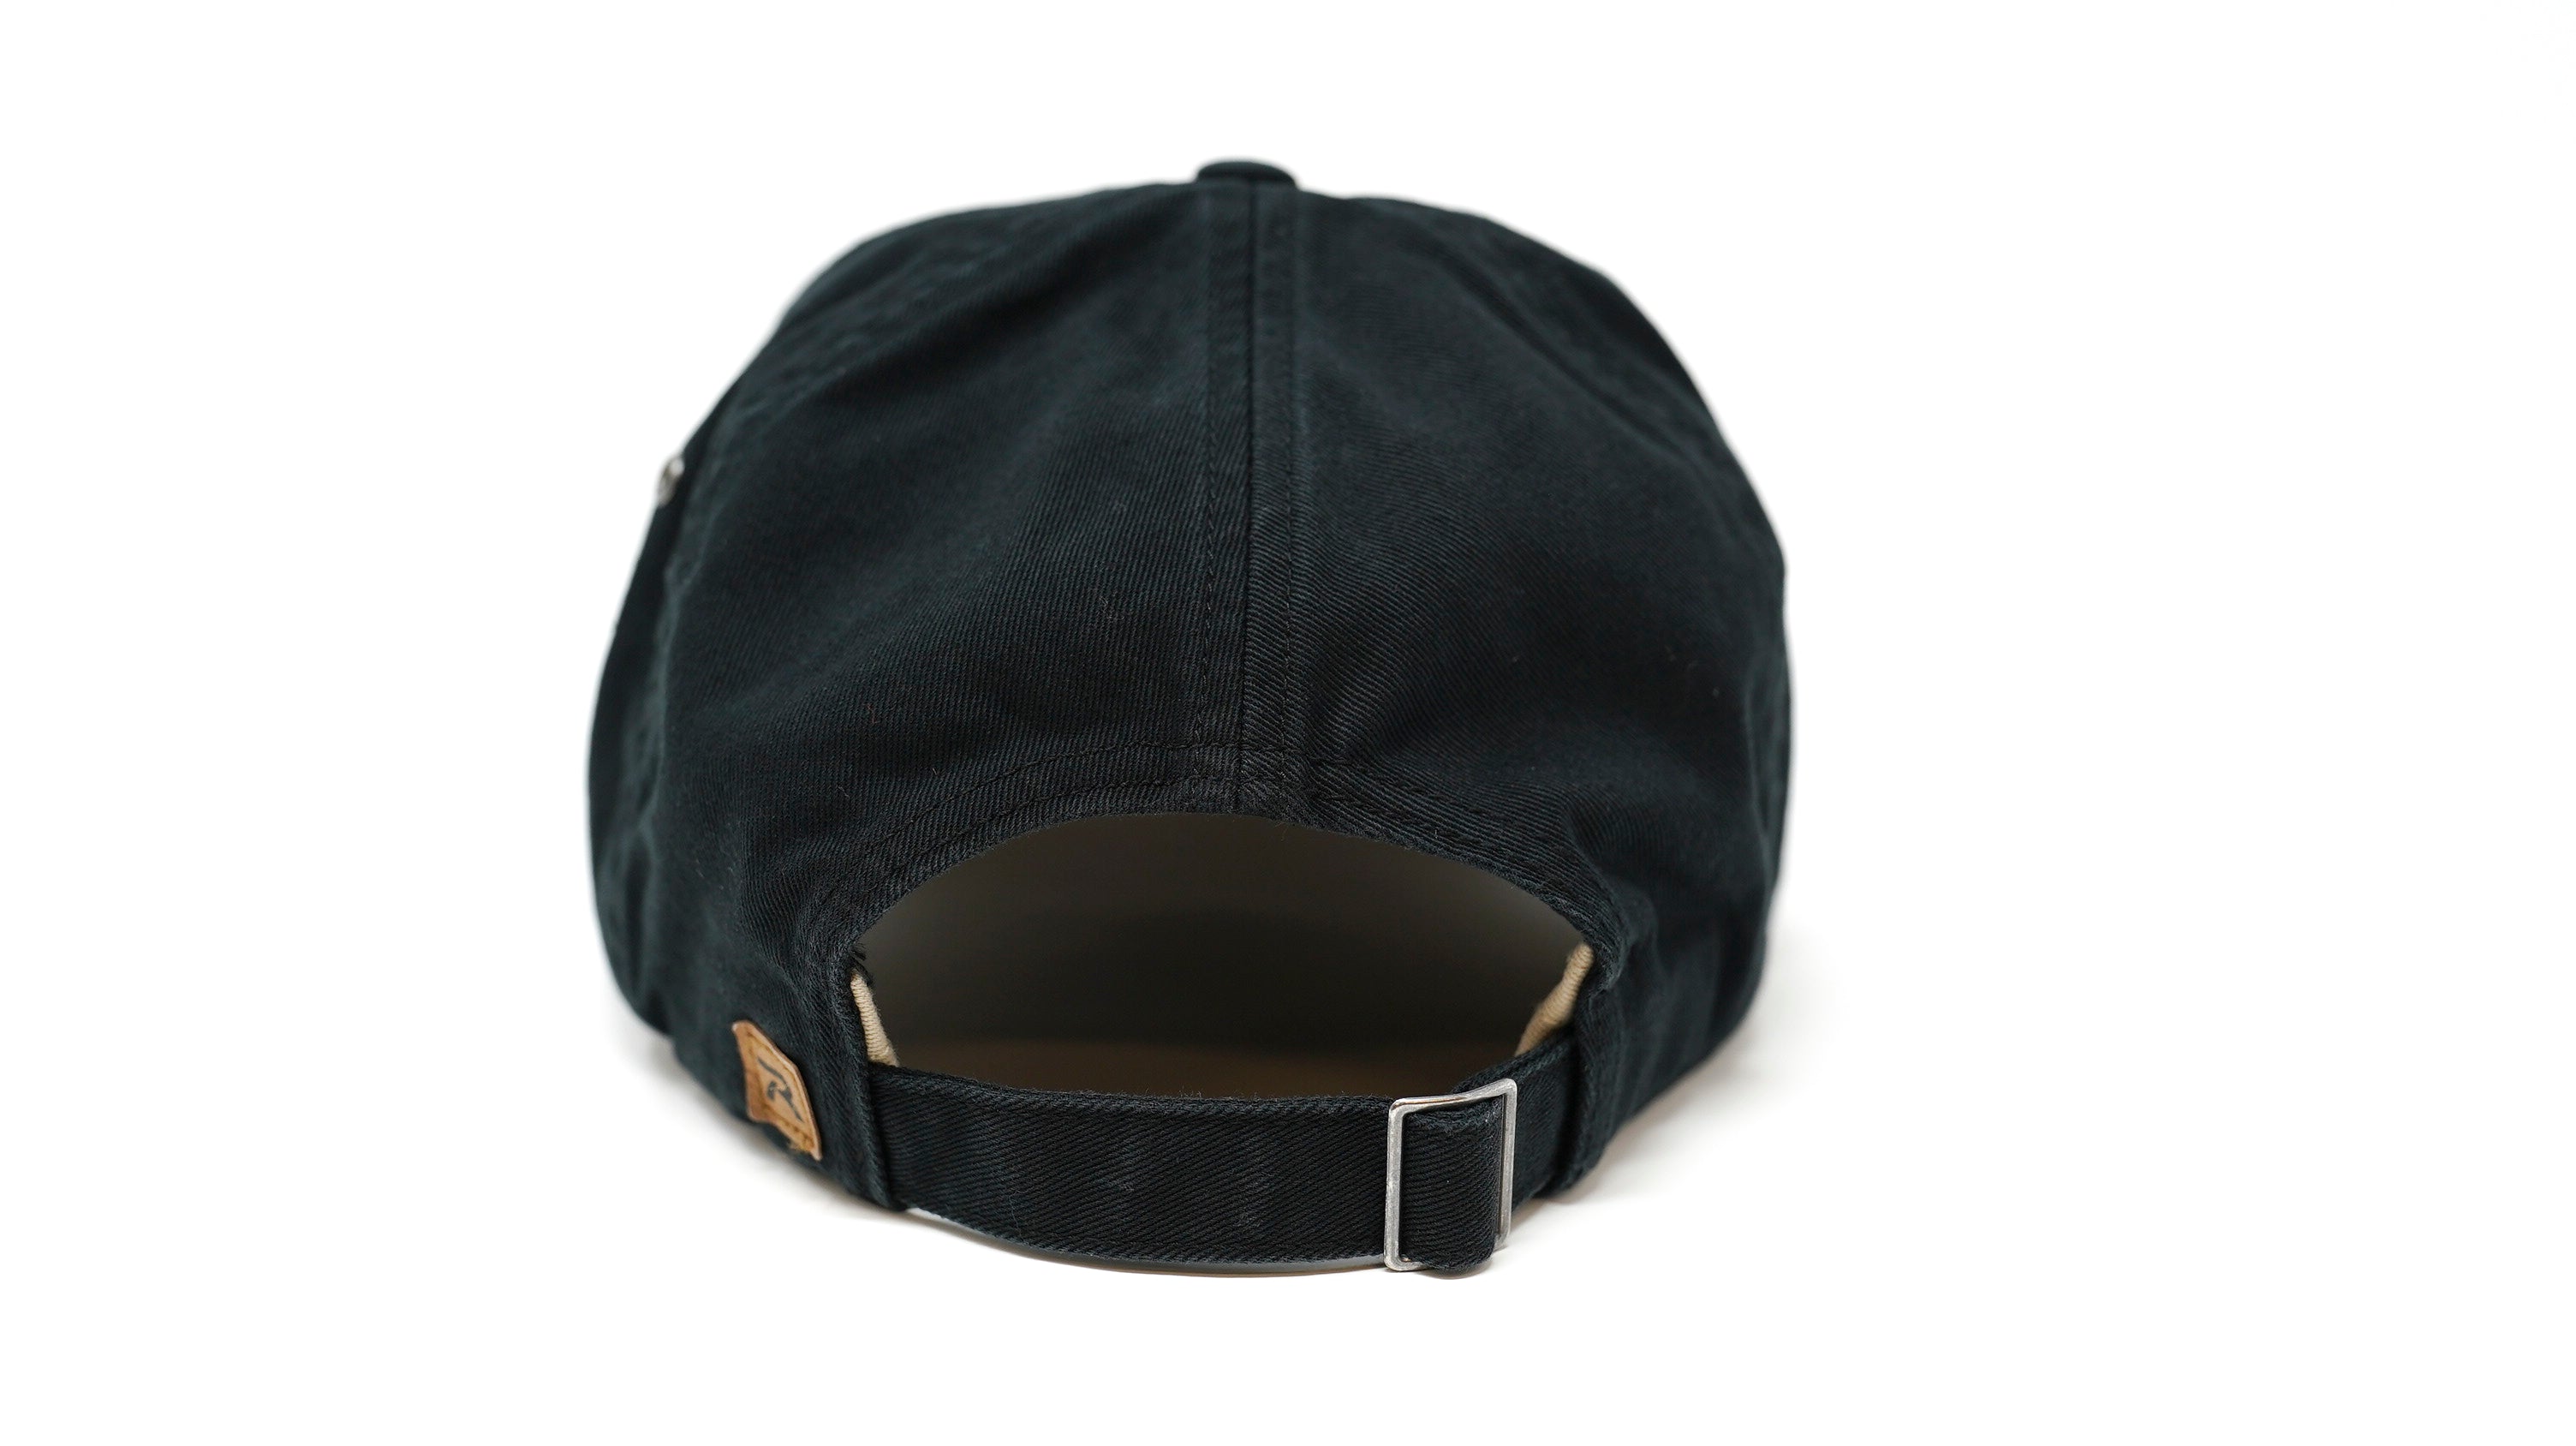 Titus Bristol Bay Bait and Tackle - Chino Washed Polo Hat